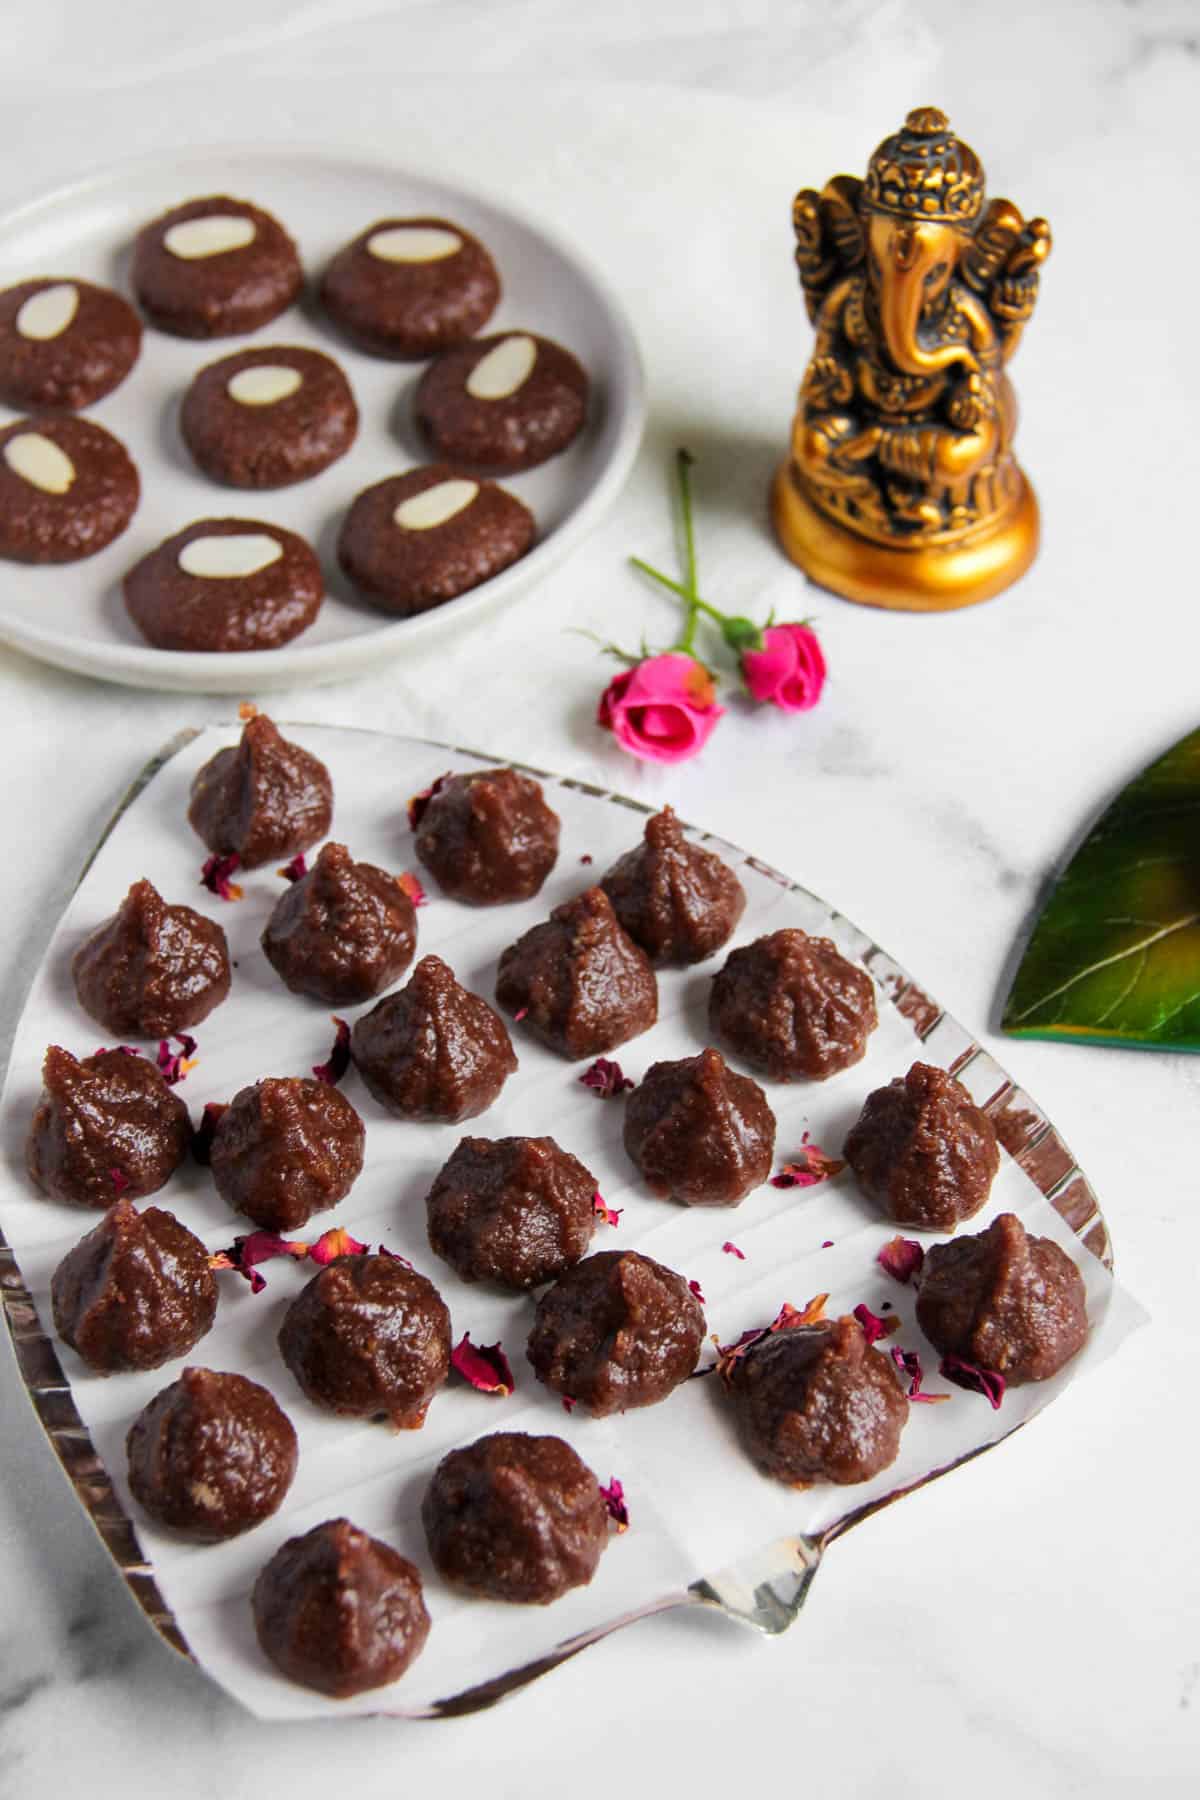 chocloate modak and peda in 2 plates 